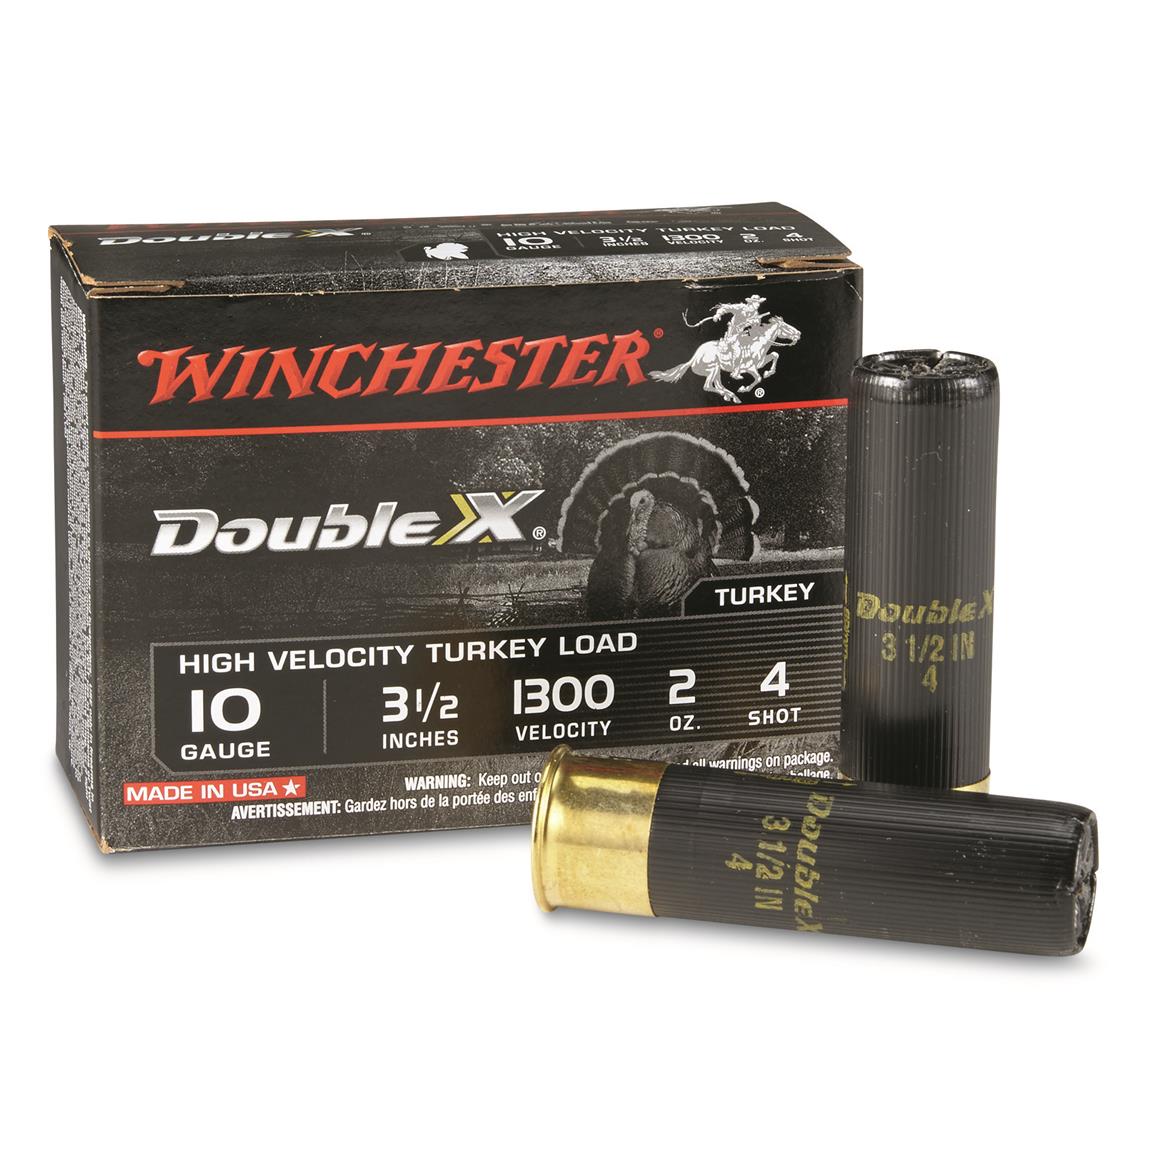 Winchester Double X High-velocity Turkey Load, 10 Gauge, 3 1/2", 2 oz., 10 Rounds